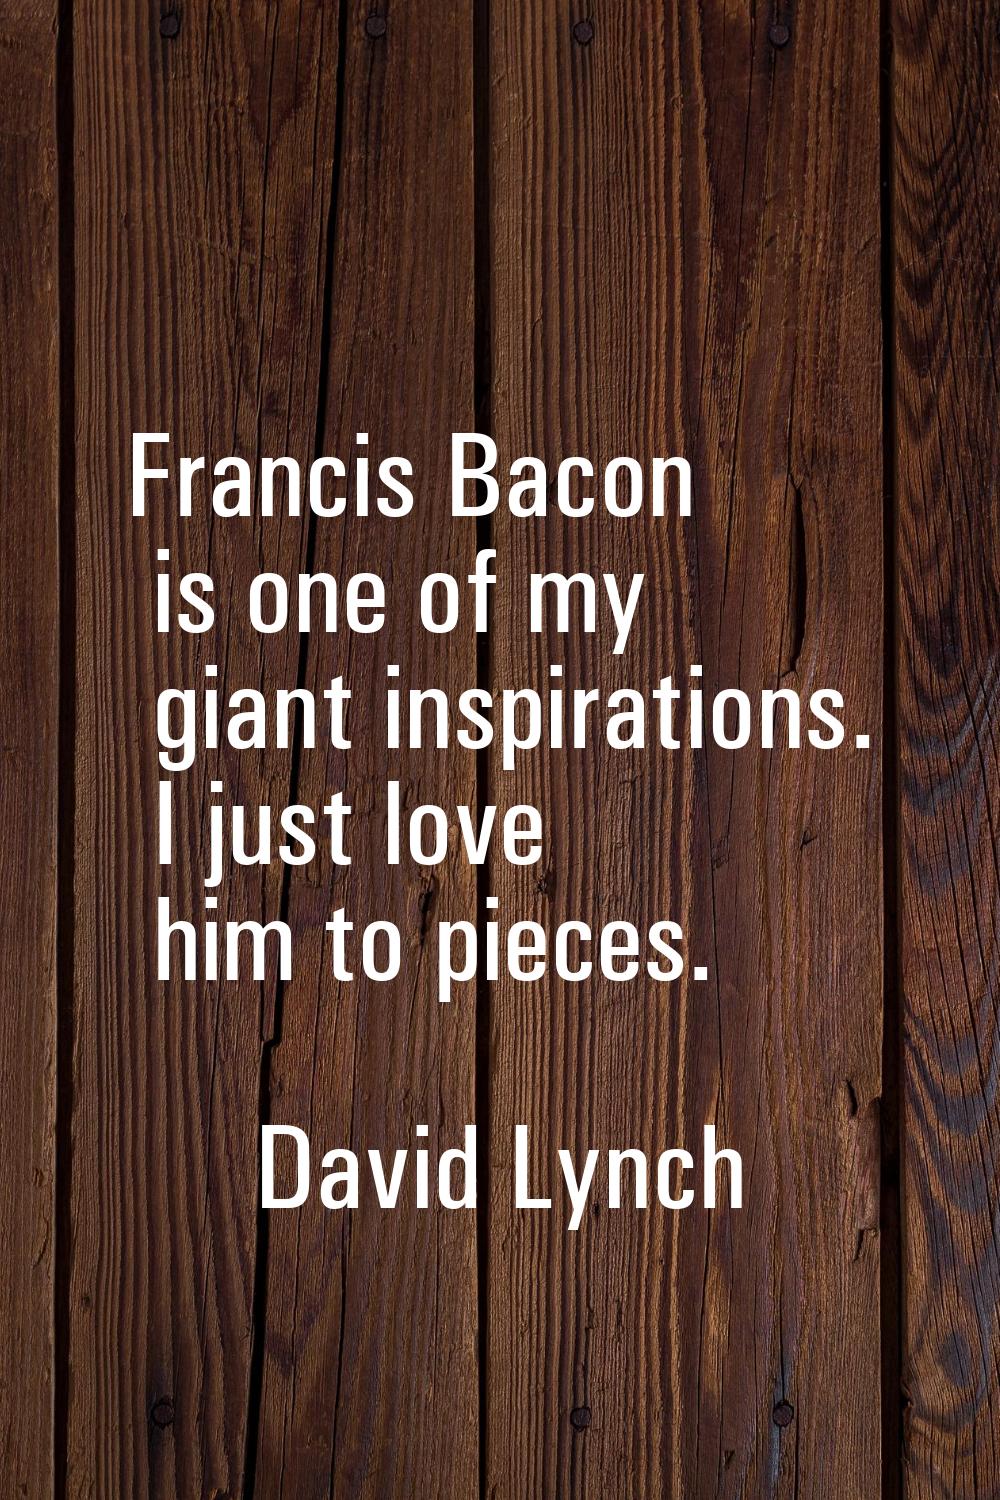 Francis Bacon is one of my giant inspirations. I just love him to pieces.